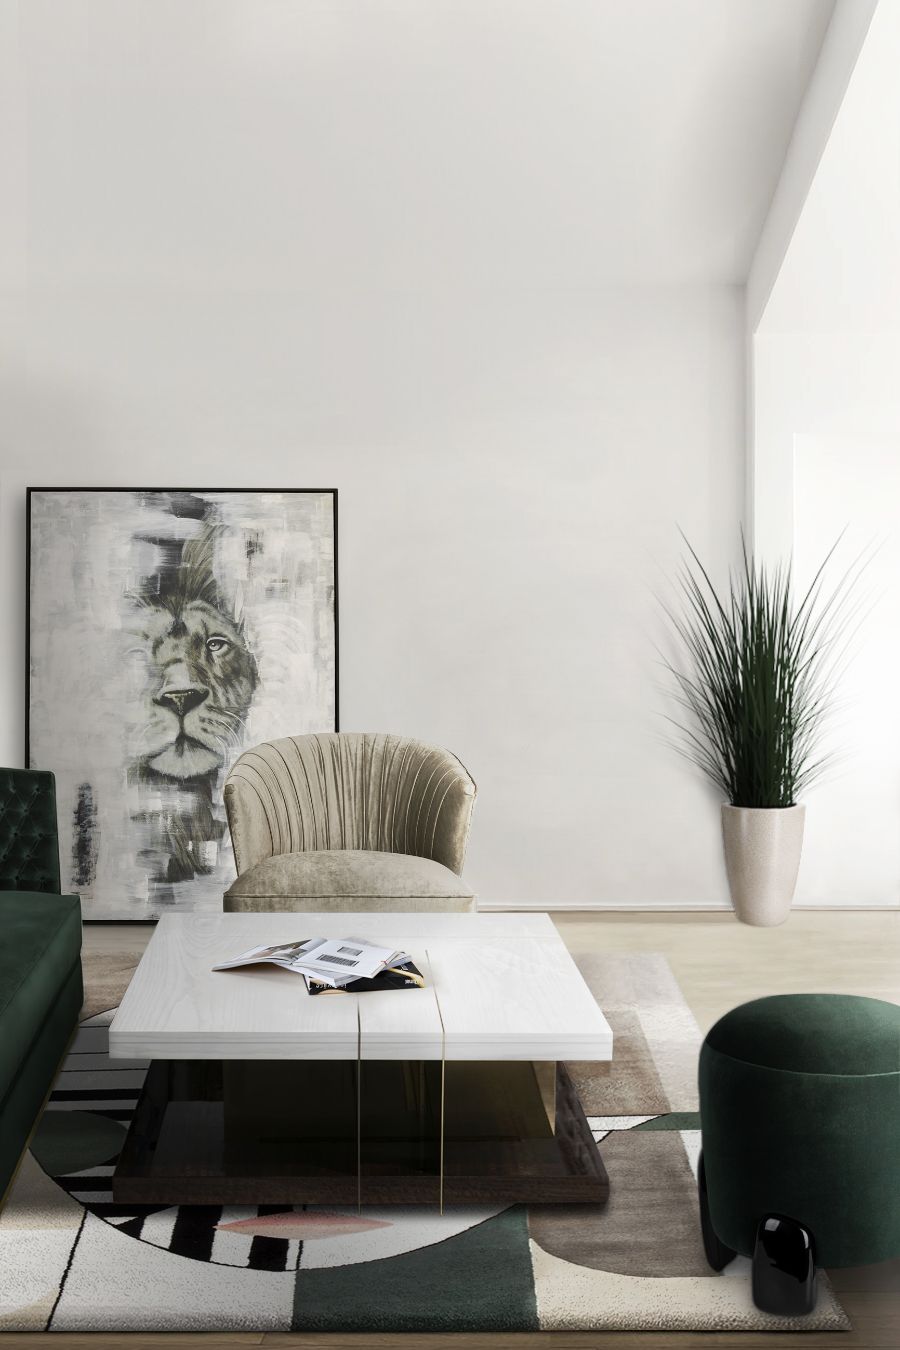 Spring Trends 2021, The Must-Follow Interior Design Ideas spring trends 2021 Spring Trends 2021, The Must-Follow Interior Design Ideas Spring Trends 2021 The Must Follow Interior Design Tendencies 6